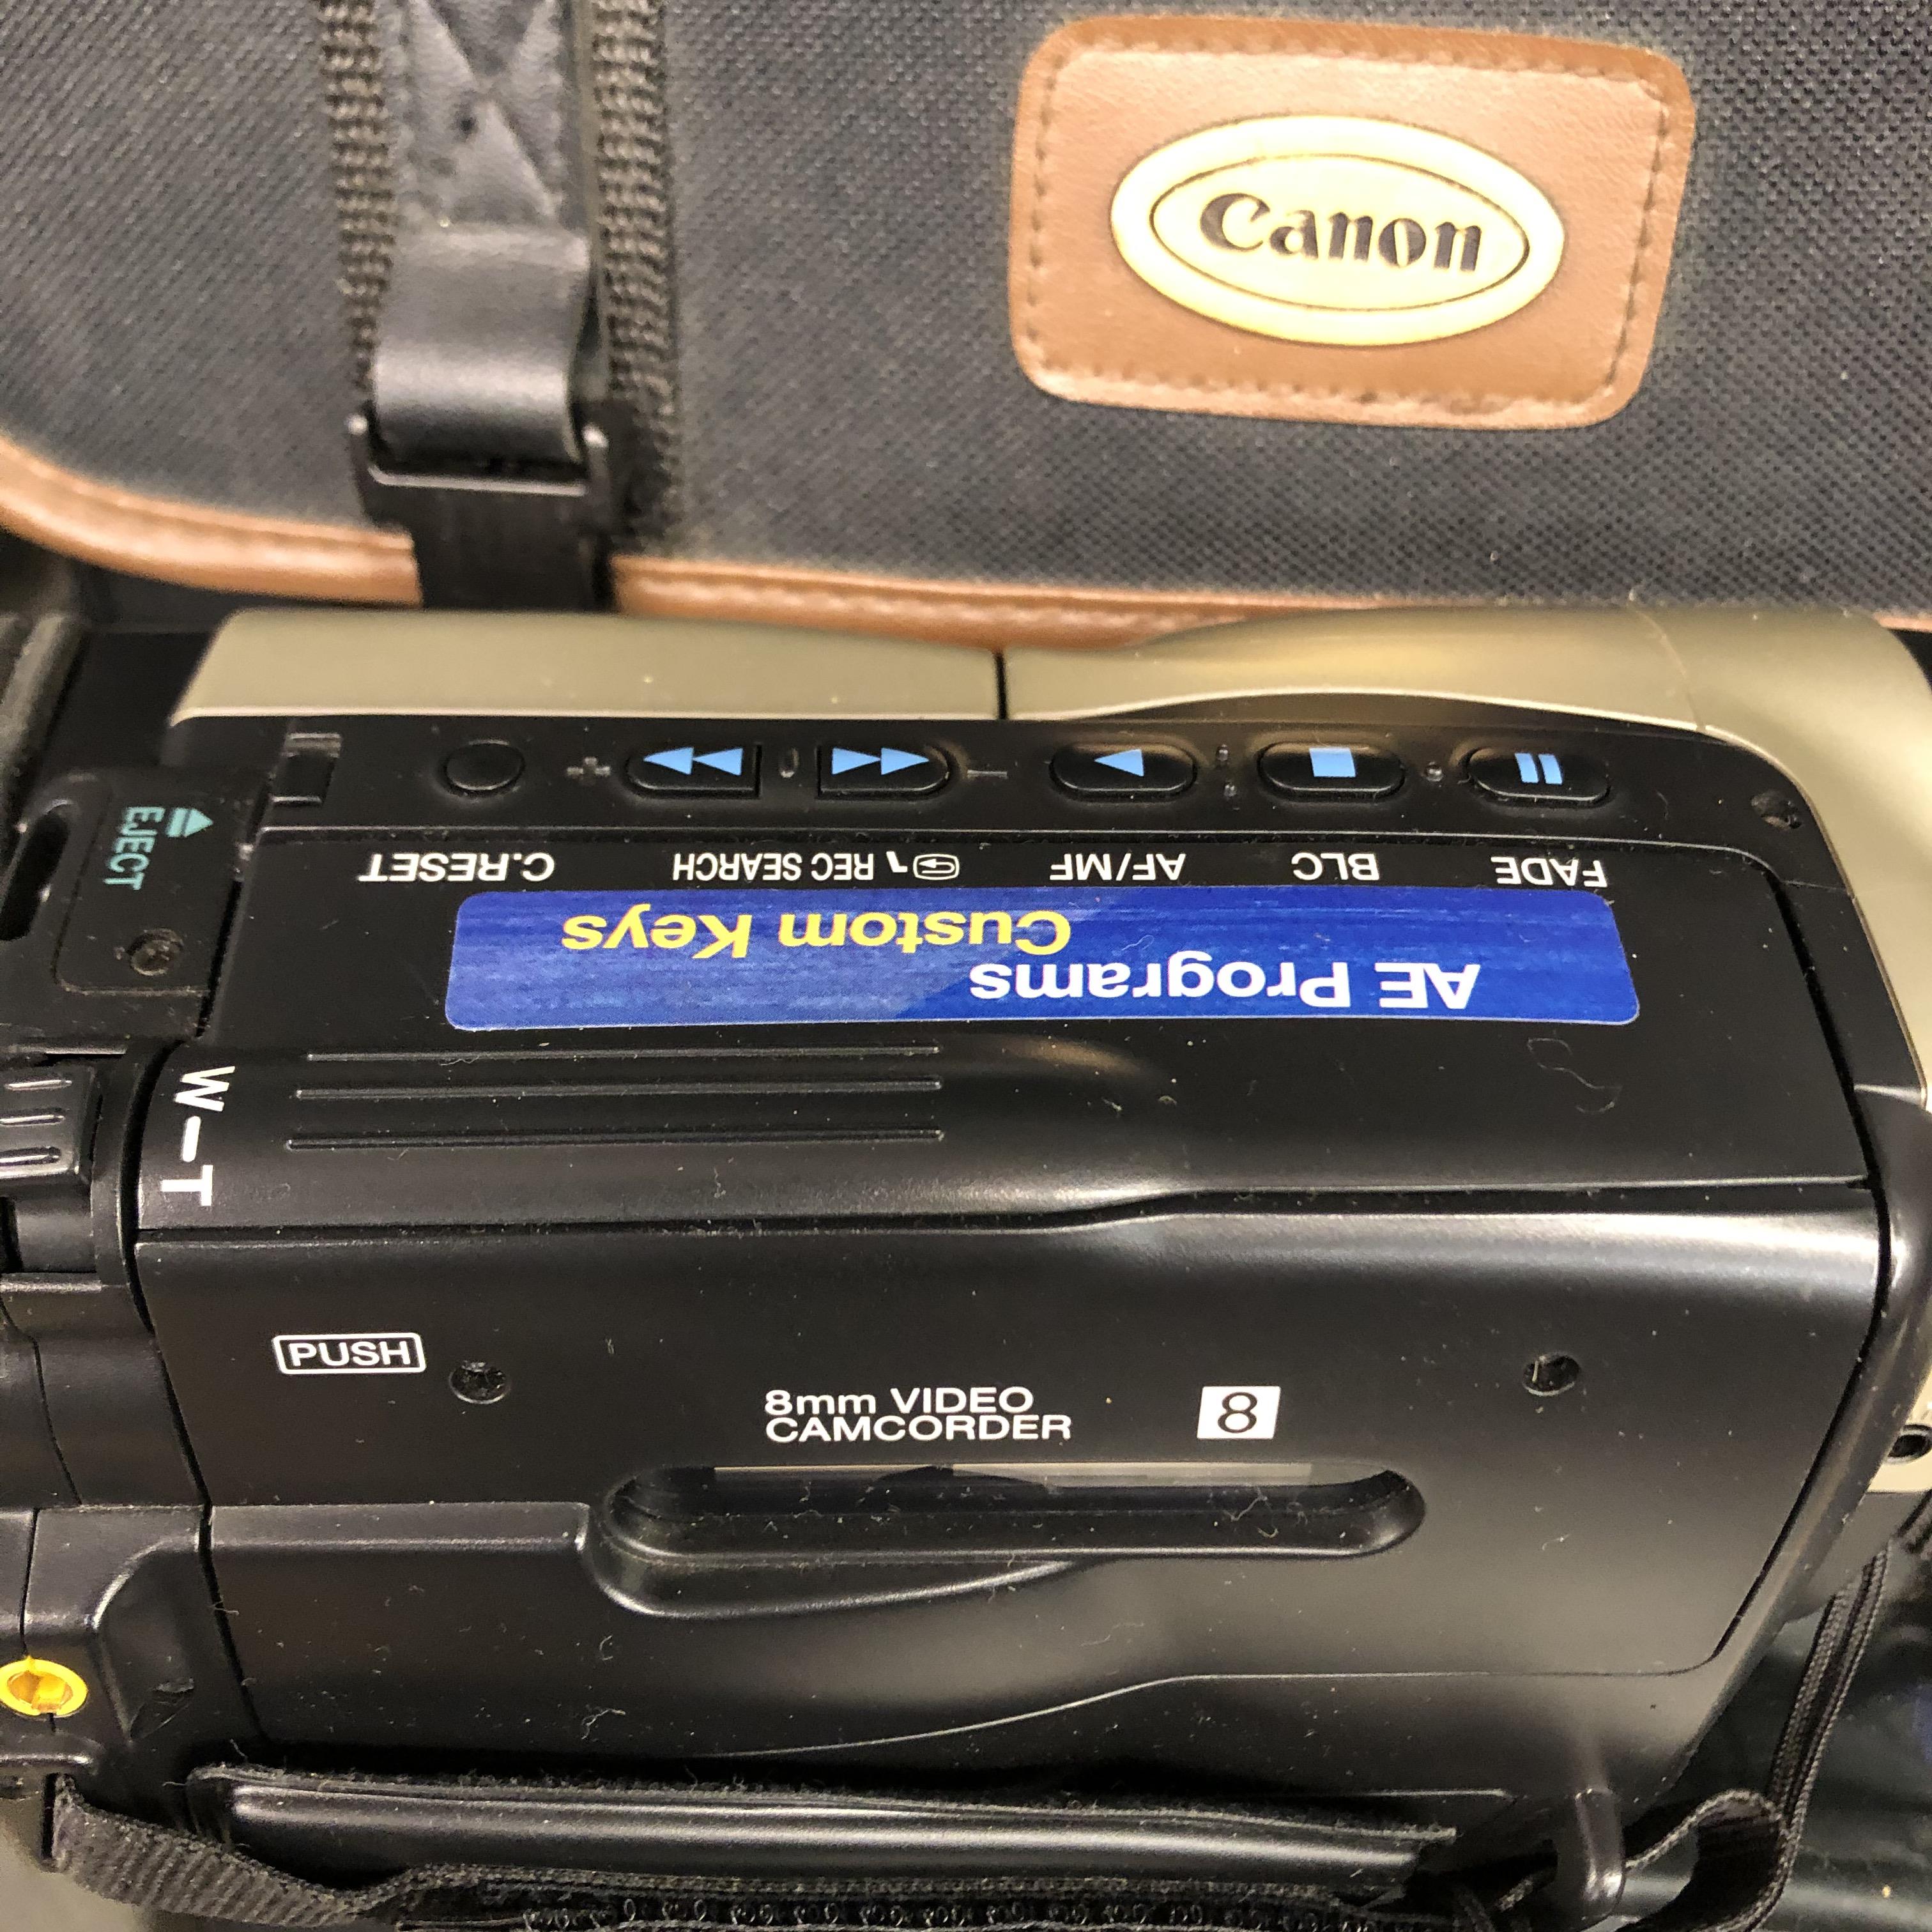 CANON 8MM VIDEO CAMCORDER IN TRAVEL BAG - Image 4 of 7